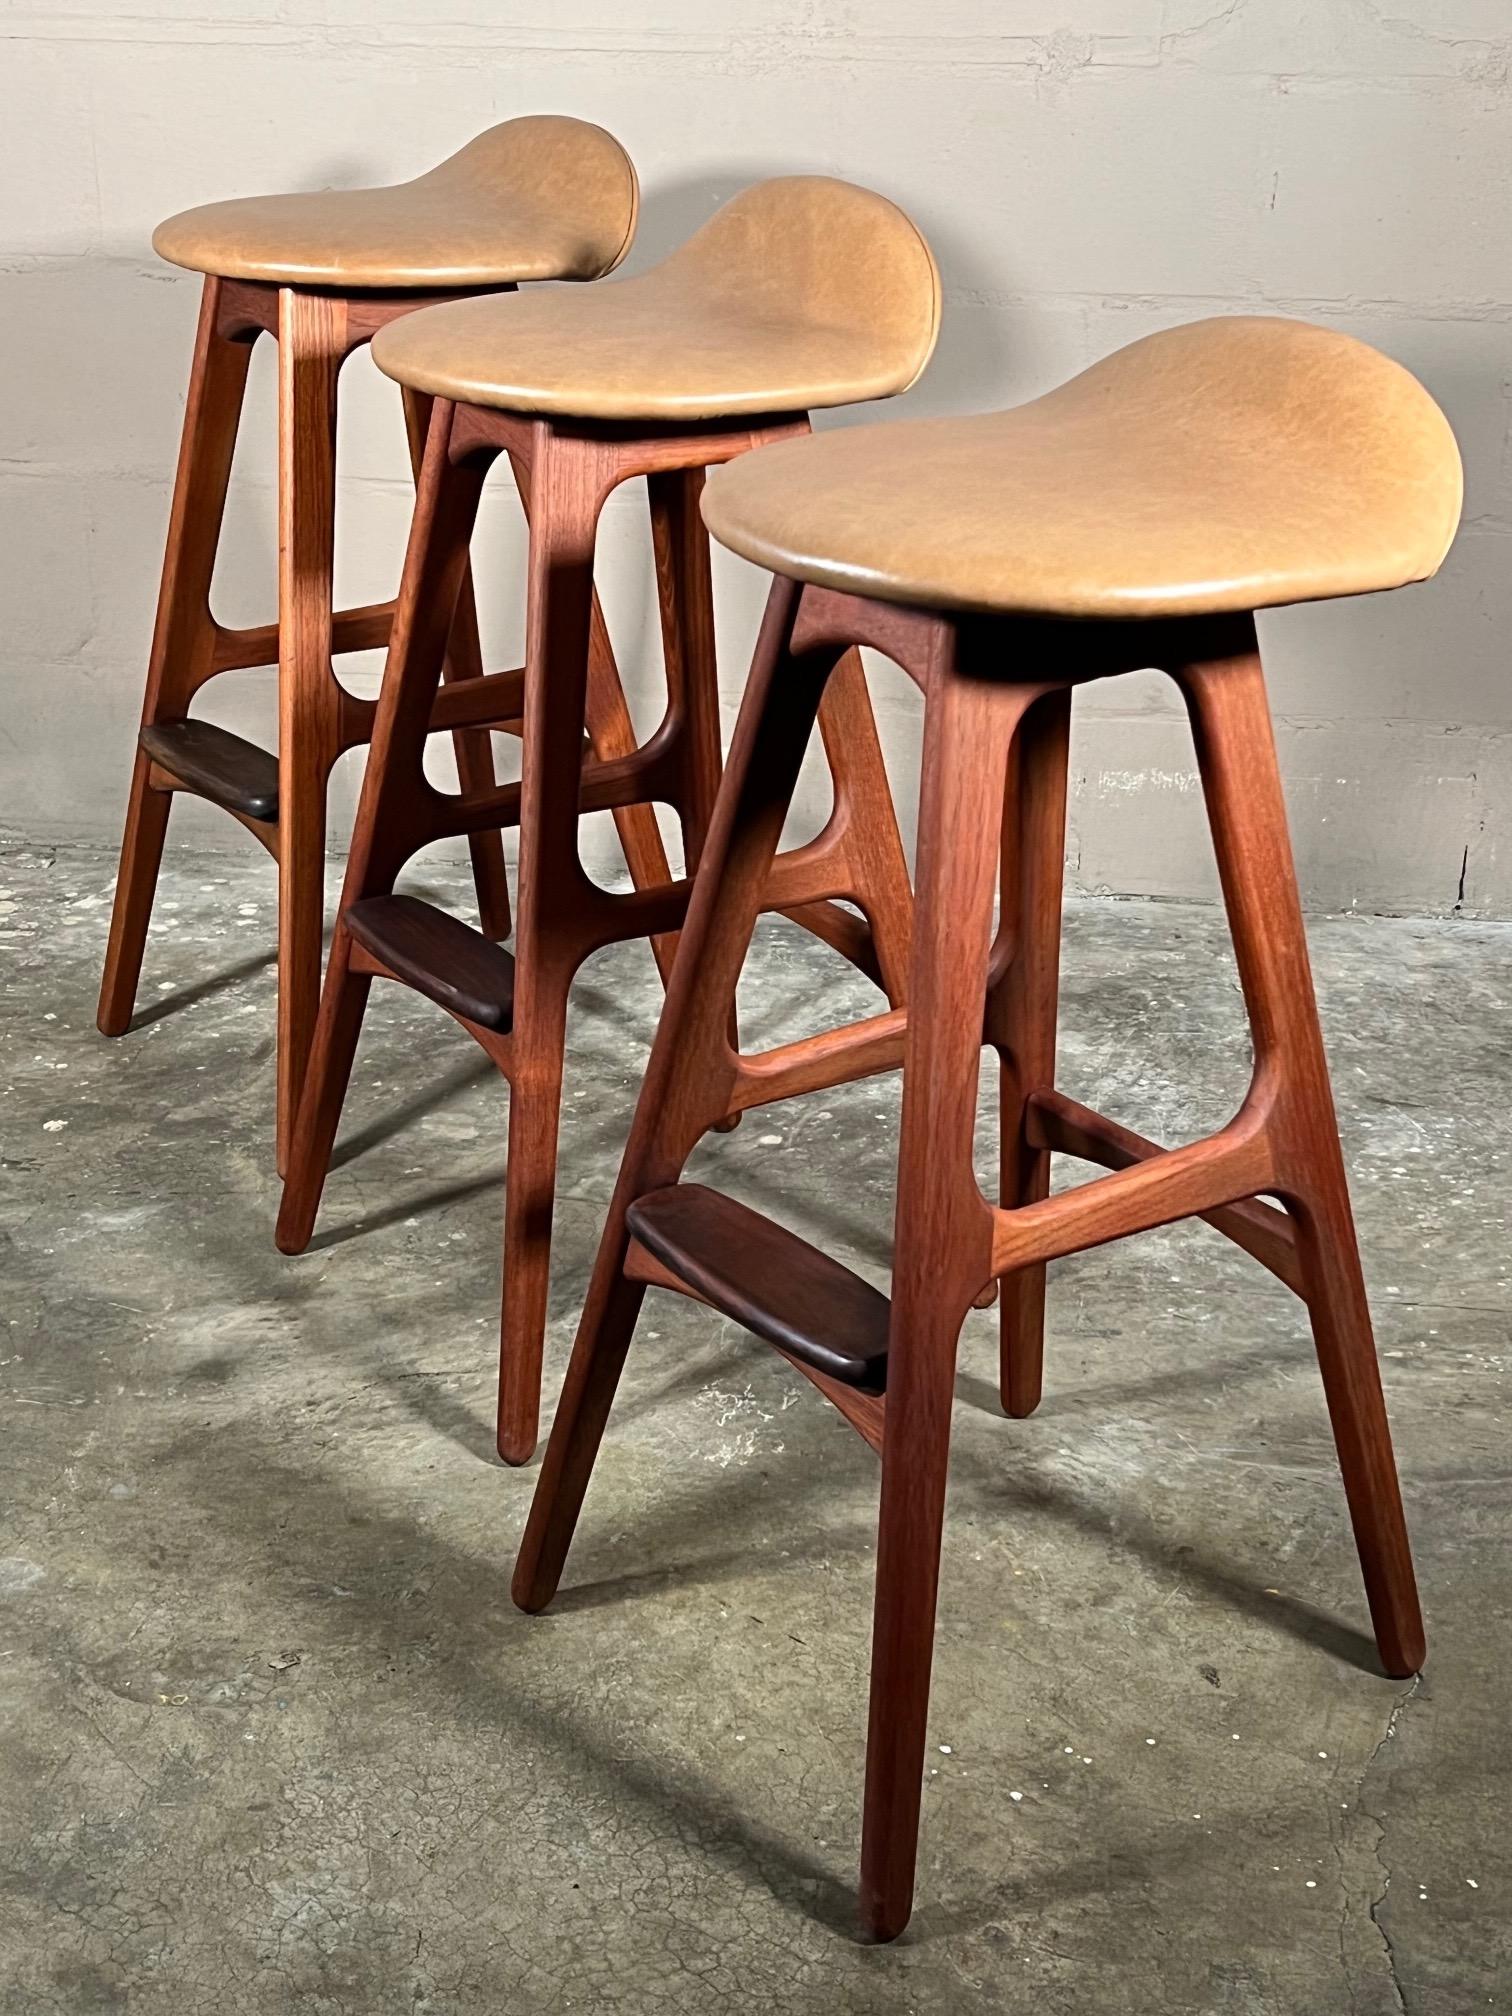 Erik Buck(Buch) Bar Stools Model OD-61 Produced by Oddense Møbelfabrik in Denmark. This is a set of three, made of teak/rosewood. Restored and reupholstered in brown leather. Total height is 32.5